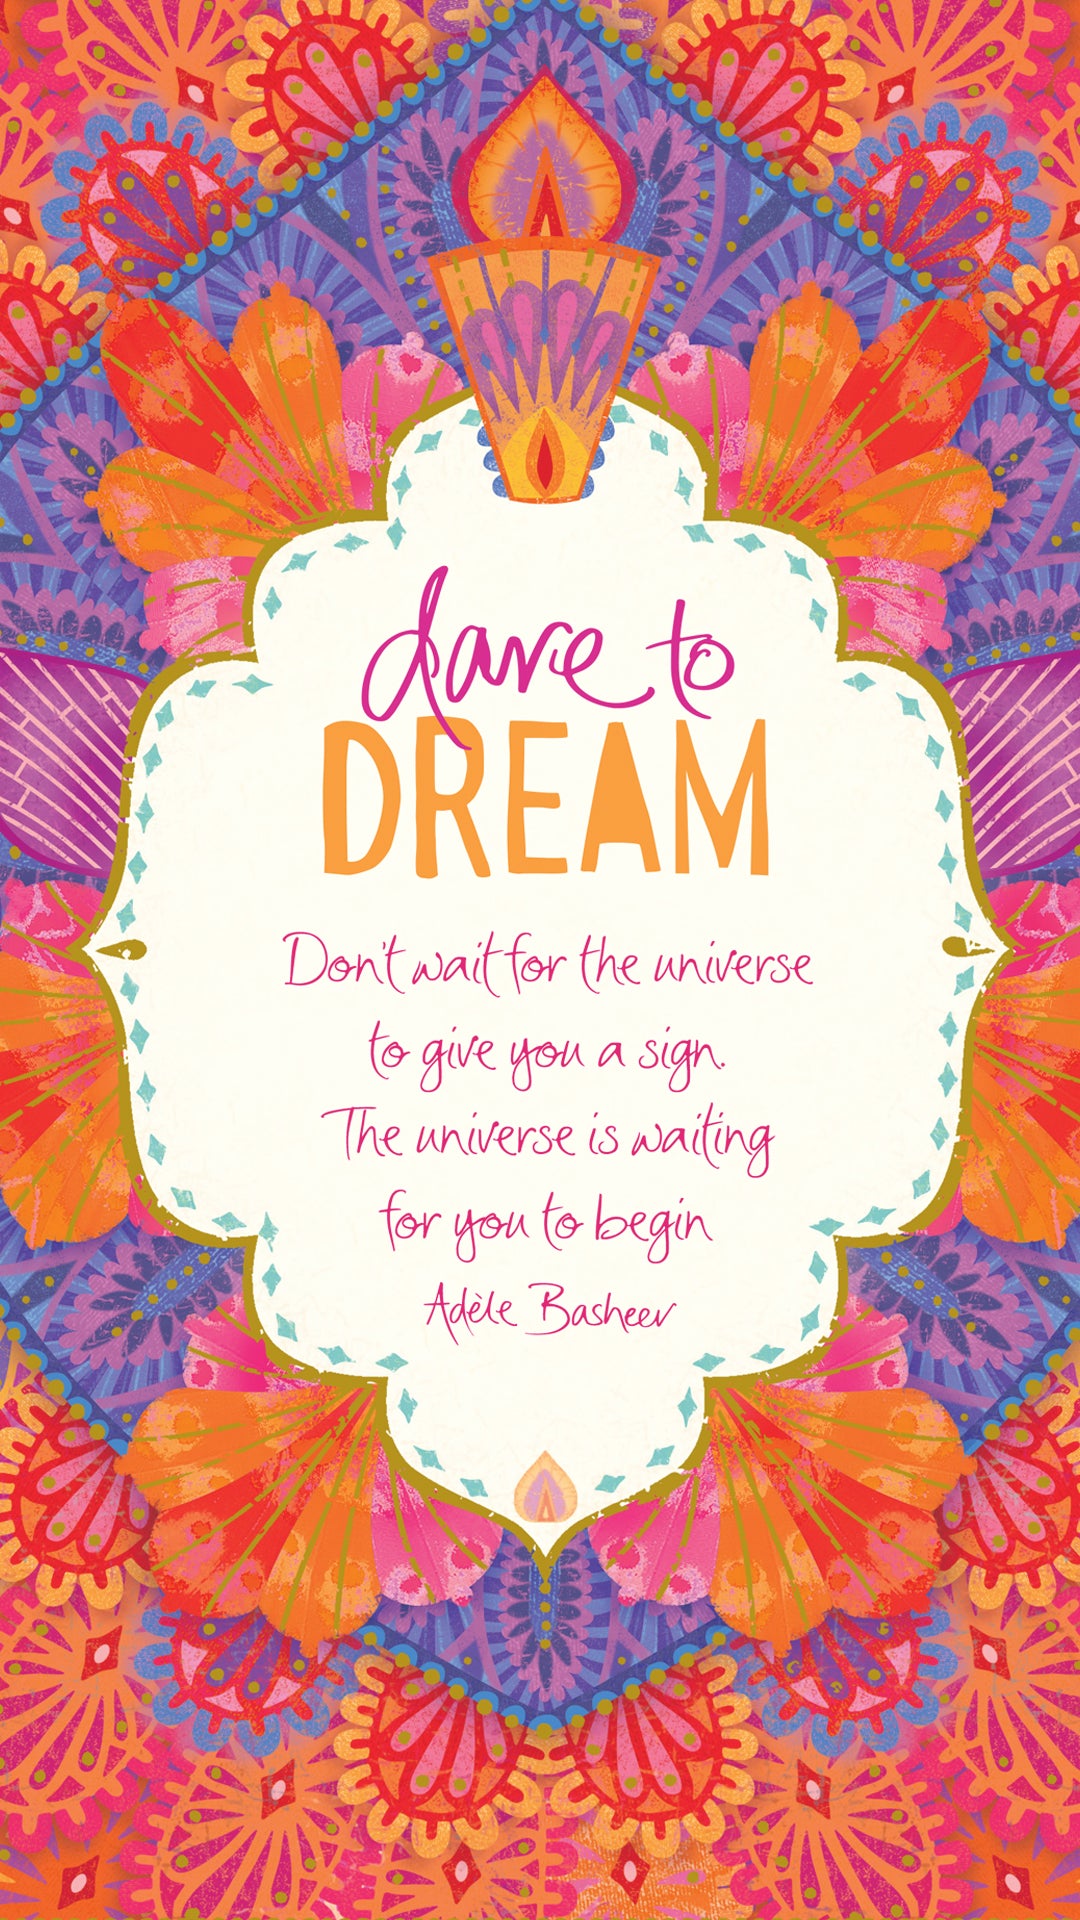 Dare to Dream quote from inspirational icon Adèle Basheer and Intrinsic